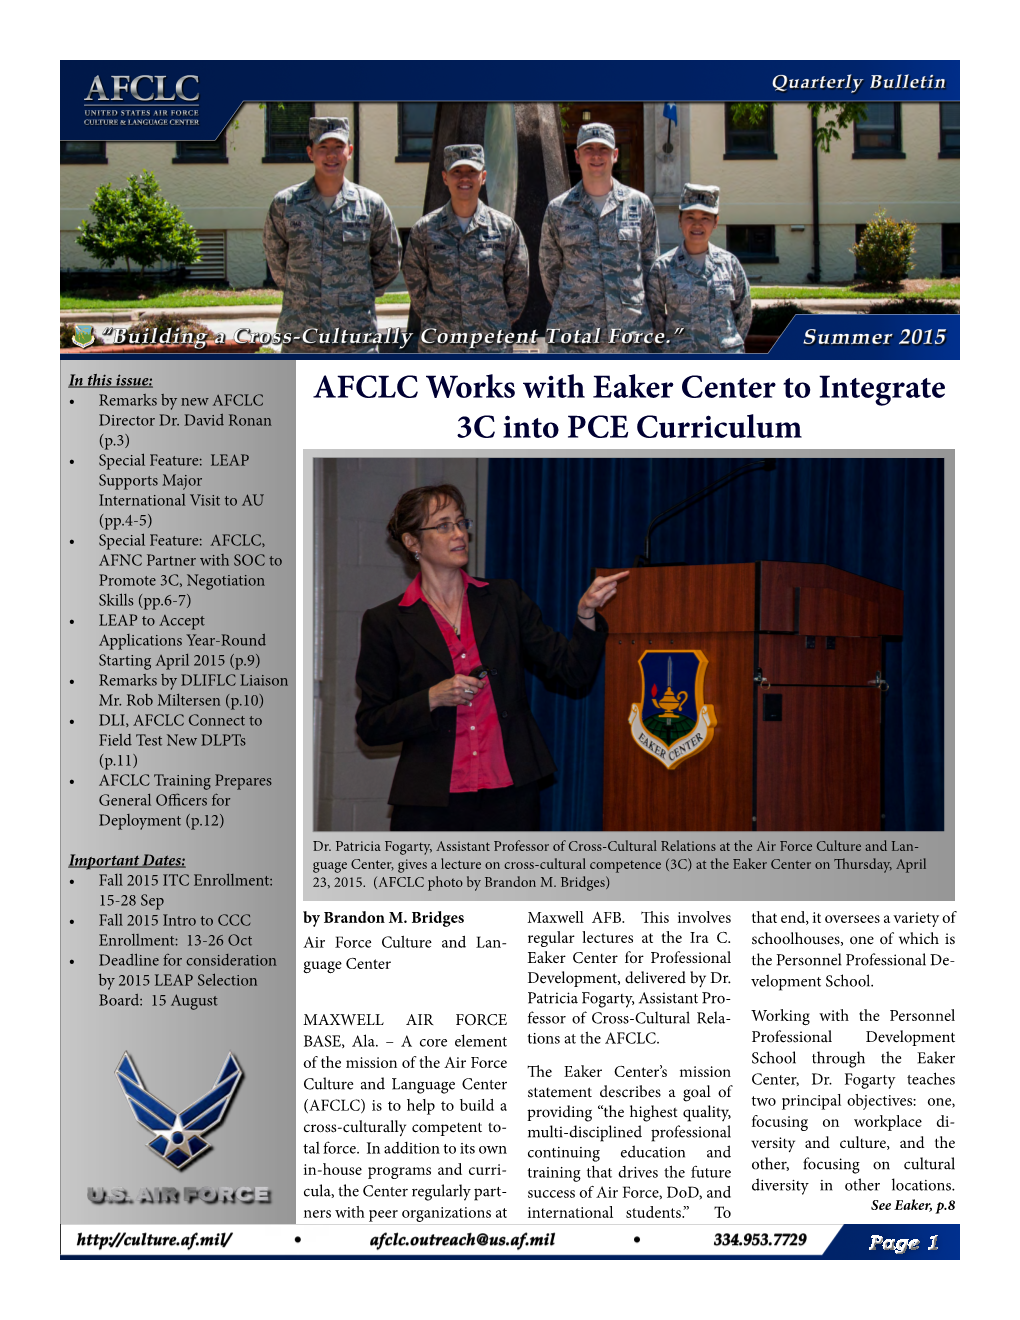 AFCLC Works with Eaker Center to Integrate 3C Into PCE Curriculum